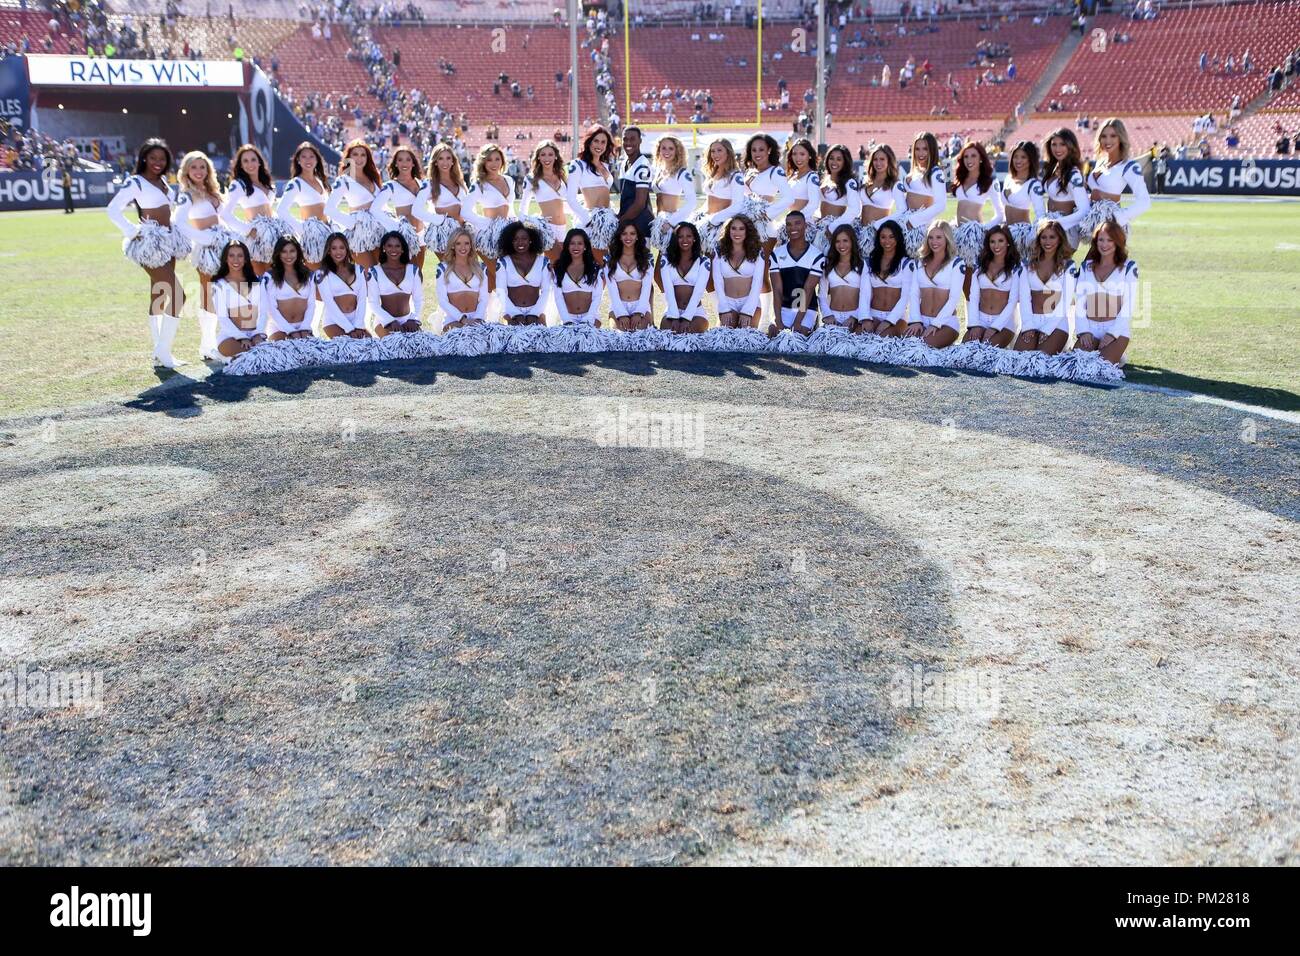 Los Angeles, CA, USA. 16th Sep, 2018. Los Angeles Rams cheerleaders after the NFL Arizona Cardinals vs Los Angeles Rams at the Los Angeles Memorial Coliseum in Los Angeles, Ca on September 16, 2018. Jevone Moore Credit: csm/Alamy Live News Stock Photo